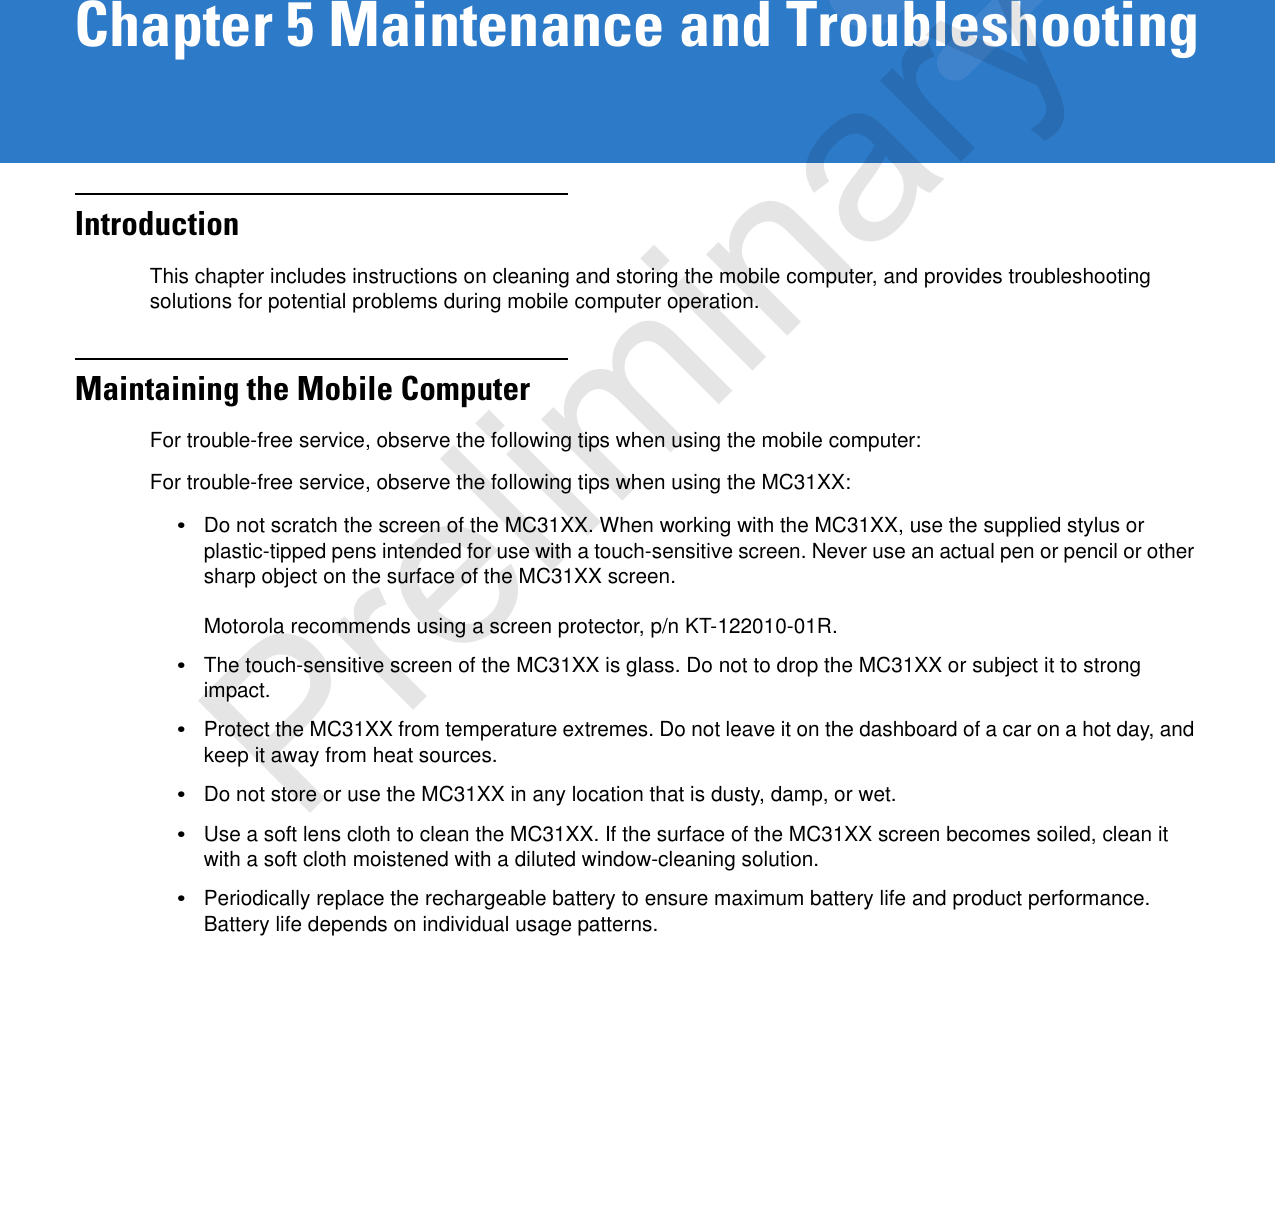 Chapter 5 Maintenance and TroubleshootingIntroductionThis chapter includes instructions on cleaning and storing the mobile computer, and provides troubleshooting solutions for potential problems during mobile computer operation.Maintaining the Mobile ComputerFor trouble-free service, observe the following tips when using the mobile computer:For trouble-free service, observe the following tips when using the MC31XX:•Do not scratch the screen of the MC31XX. When working with the MC31XX, use the supplied stylus or plastic-tipped pens intended for use with a touch-sensitive screen. Never use an actual pen or pencil or other sharp object on the surface of the MC31XX screen. Motorola recommends using a screen protector, p/n KT-122010-01R.•The touch-sensitive screen of the MC31XX is glass. Do not to drop the MC31XX or subject it to strong impact.•Protect the MC31XX from temperature extremes. Do not leave it on the dashboard of a car on a hot day, and keep it away from heat sources.•Do not store or use the MC31XX in any location that is dusty, damp, or wet.•Use a soft lens cloth to clean the MC31XX. If the surface of the MC31XX screen becomes soiled, clean it with a soft cloth moistened with a diluted window-cleaning solution.•Periodically replace the rechargeable battery to ensure maximum battery life and product performance. Battery life depends on individual usage patterns.Preliminary